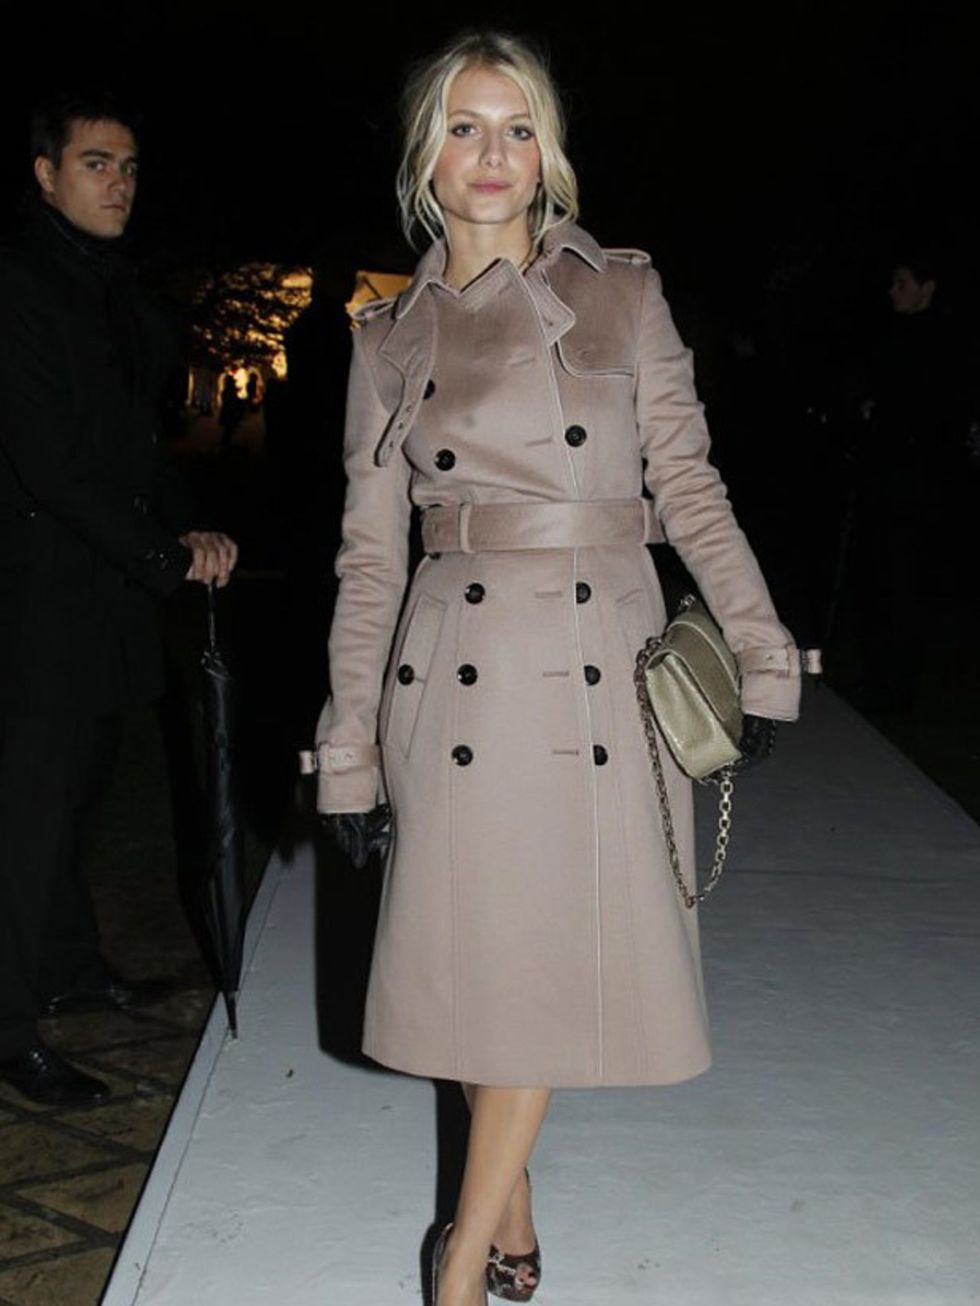 <p>French actress Melanie Laurent attends<a href="http://www.elleuk.com/news/star-style-news/burberry-takes-paris/(gid)/832074"> the opening of Burberry's new Paris flagship </a>store.</p>